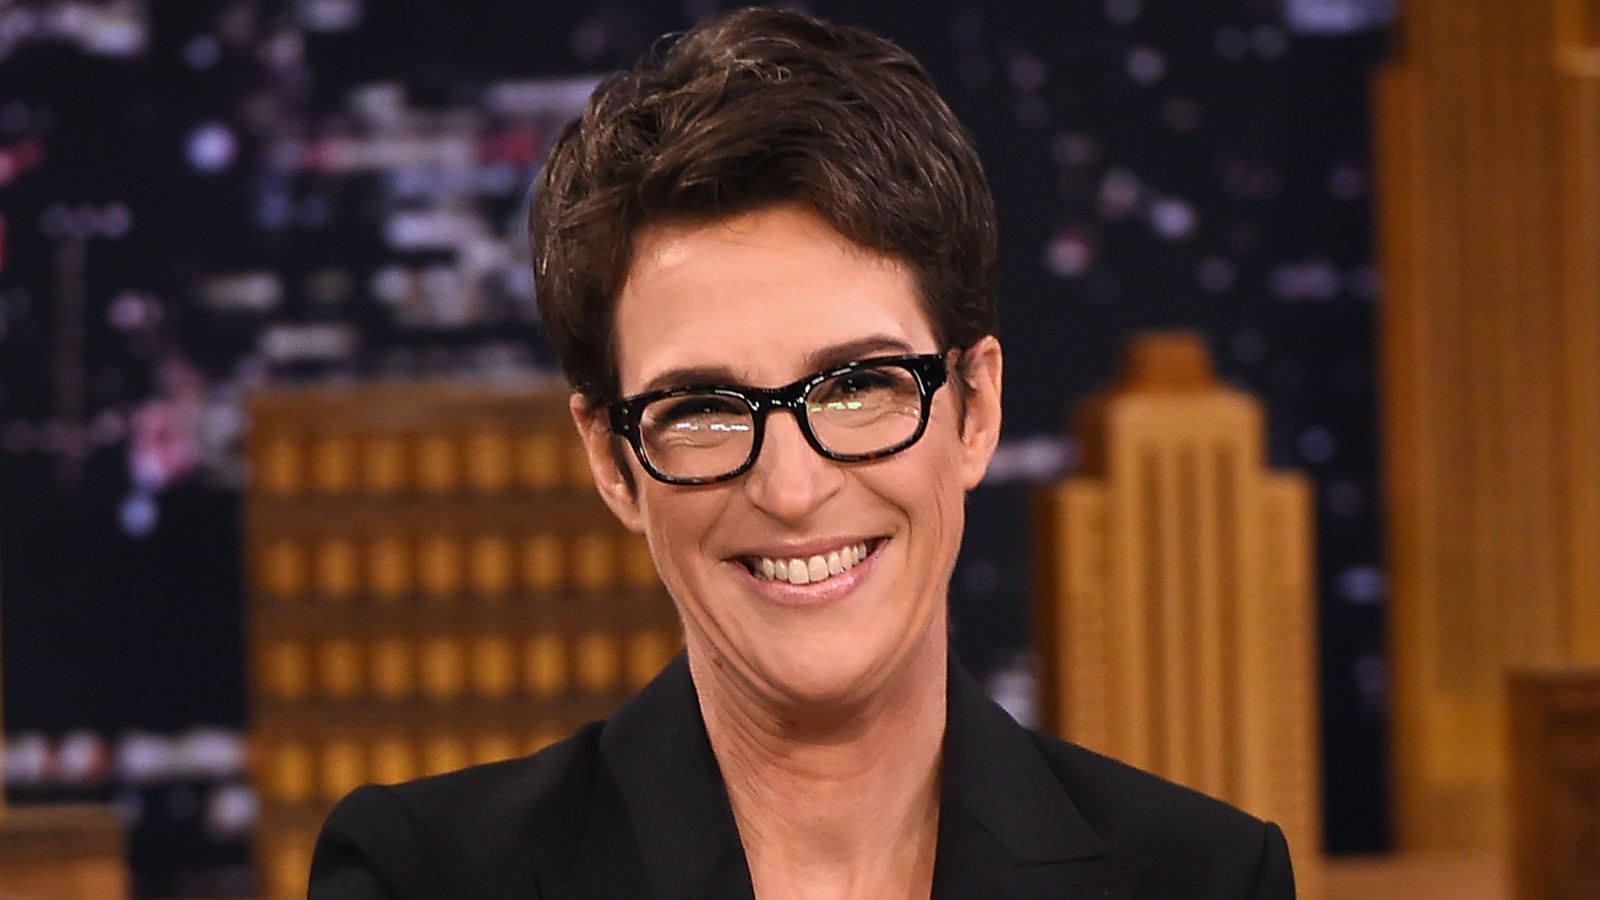 Rachel Maddow How Much Is The MSNBC Host Worth?